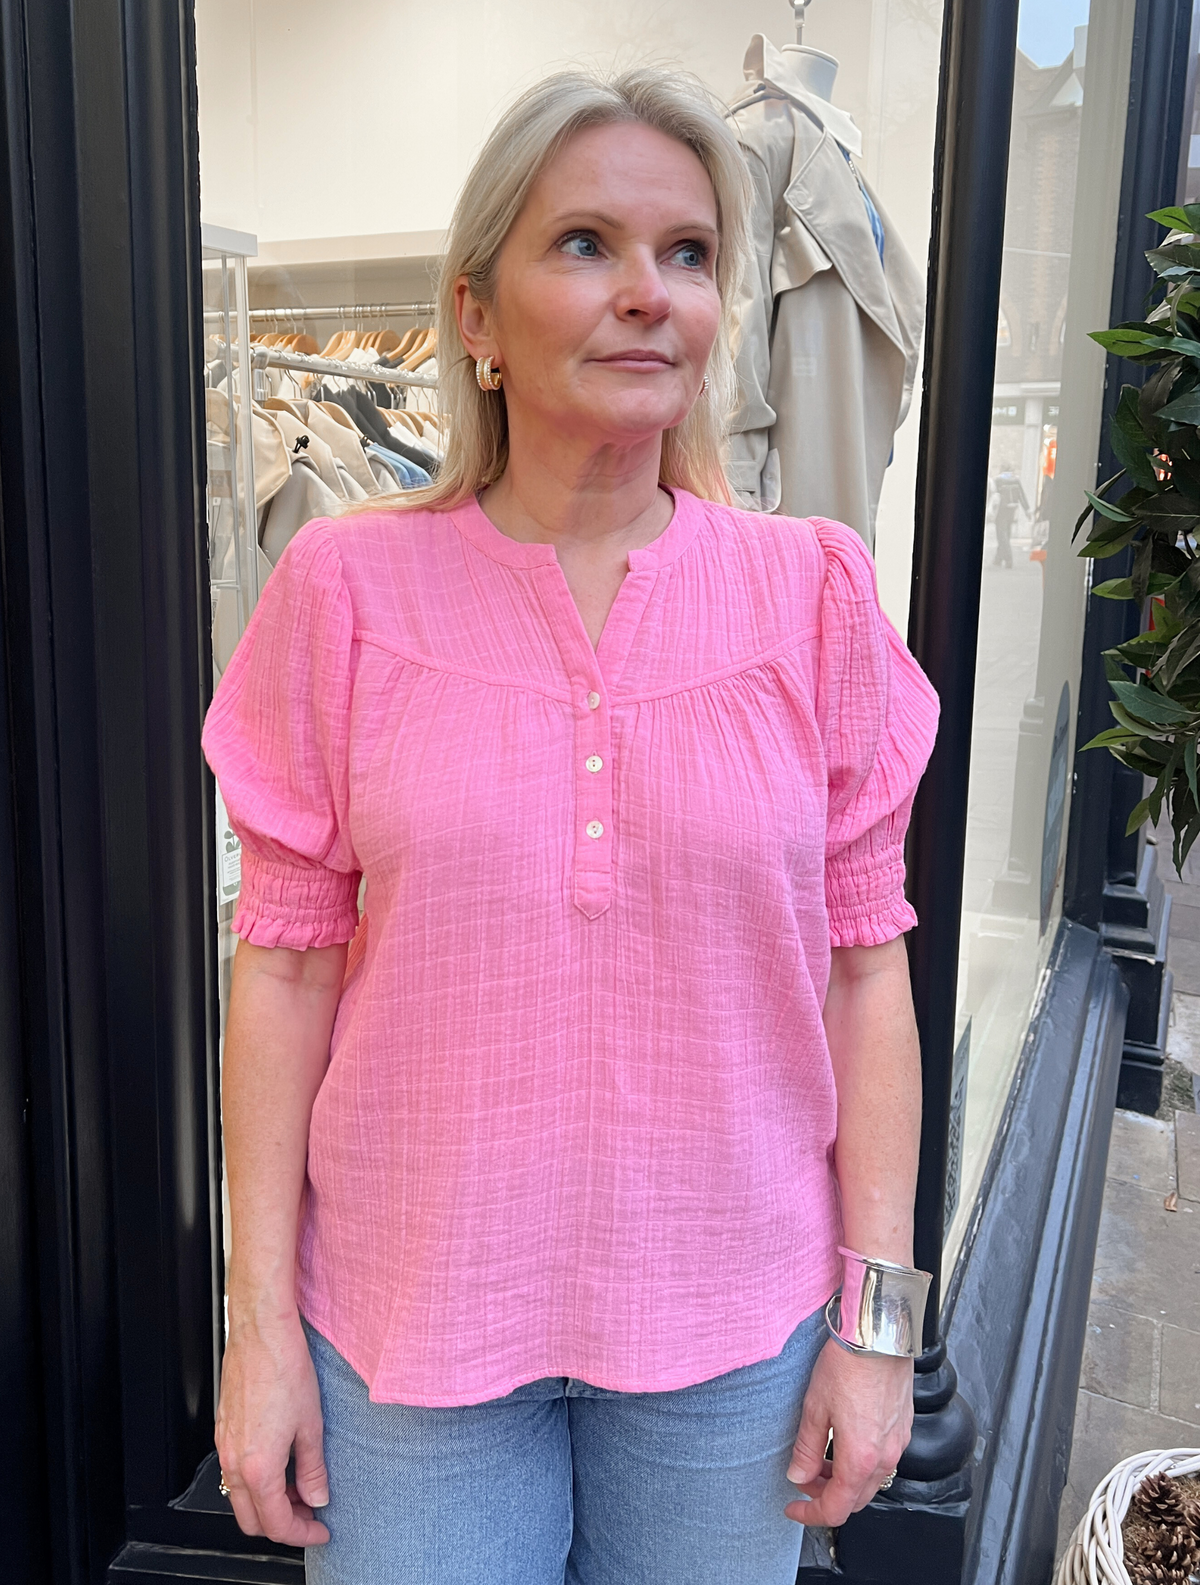 100% cotton shirt, made in a cheese cloth fabric that is cool, light and breezy. Cut in a candy pink,